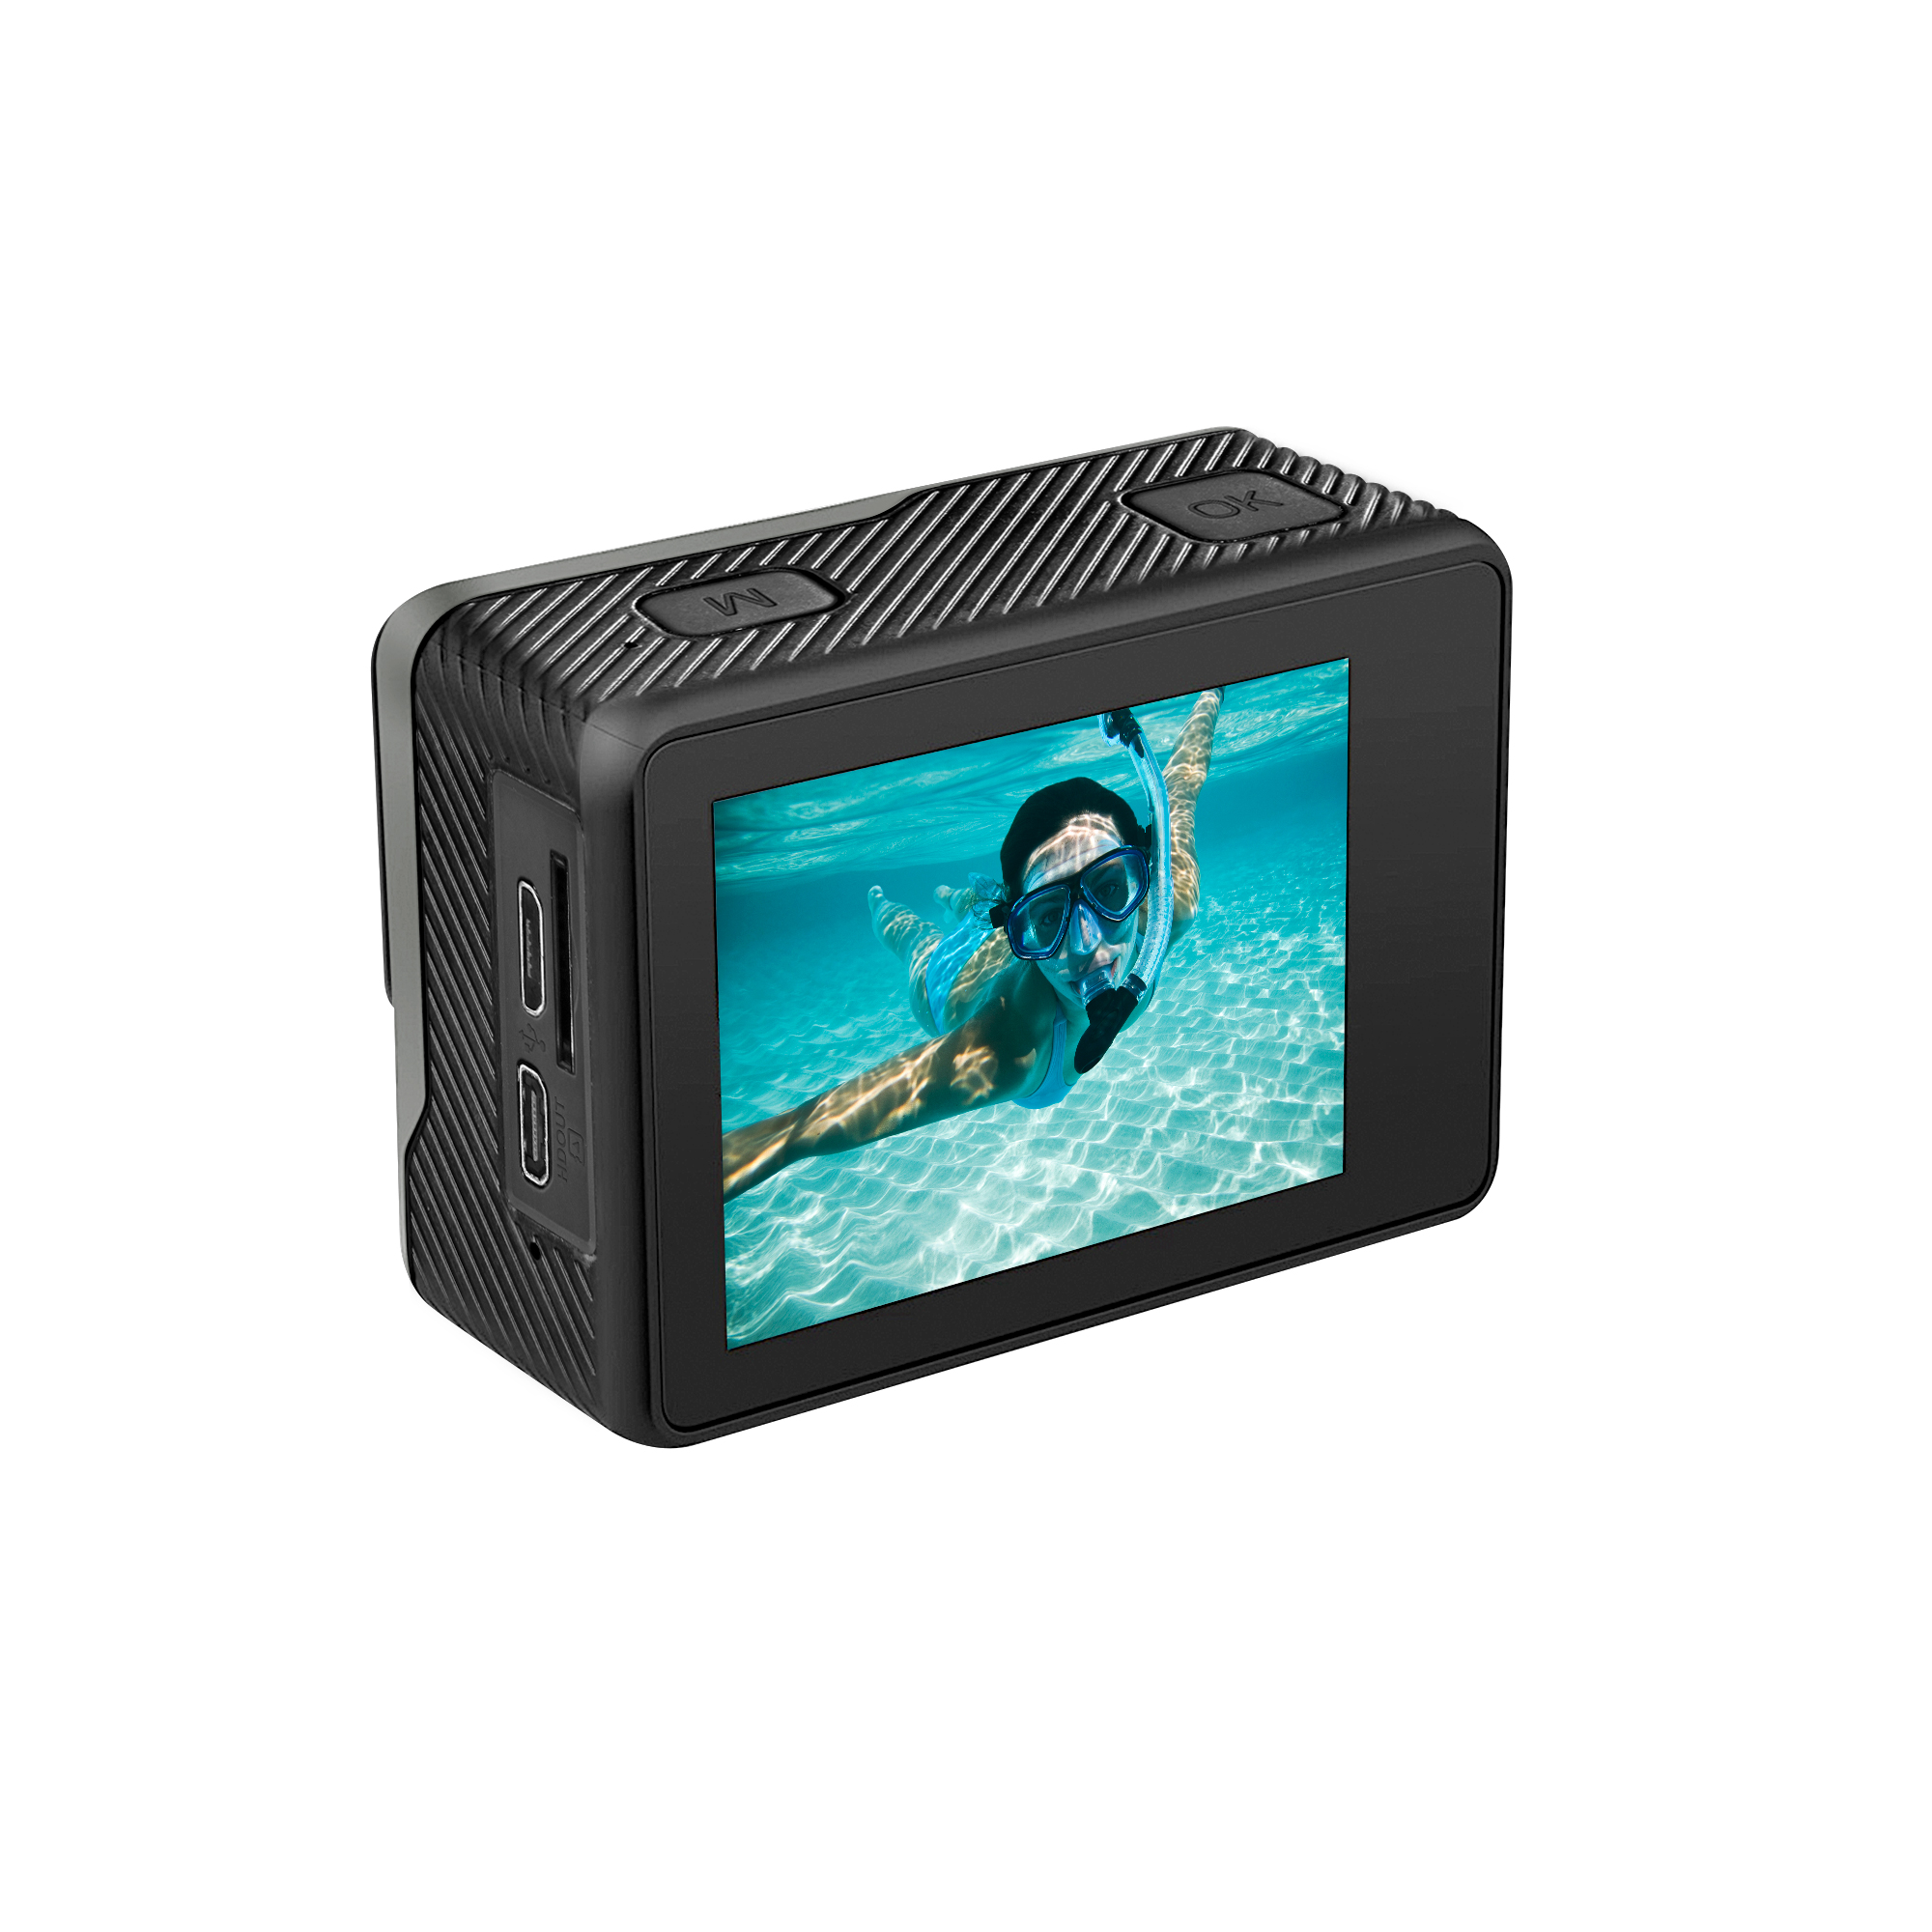 4K touch dual screen sports DV outdoor waterproof camera WIFI remote control diving camera